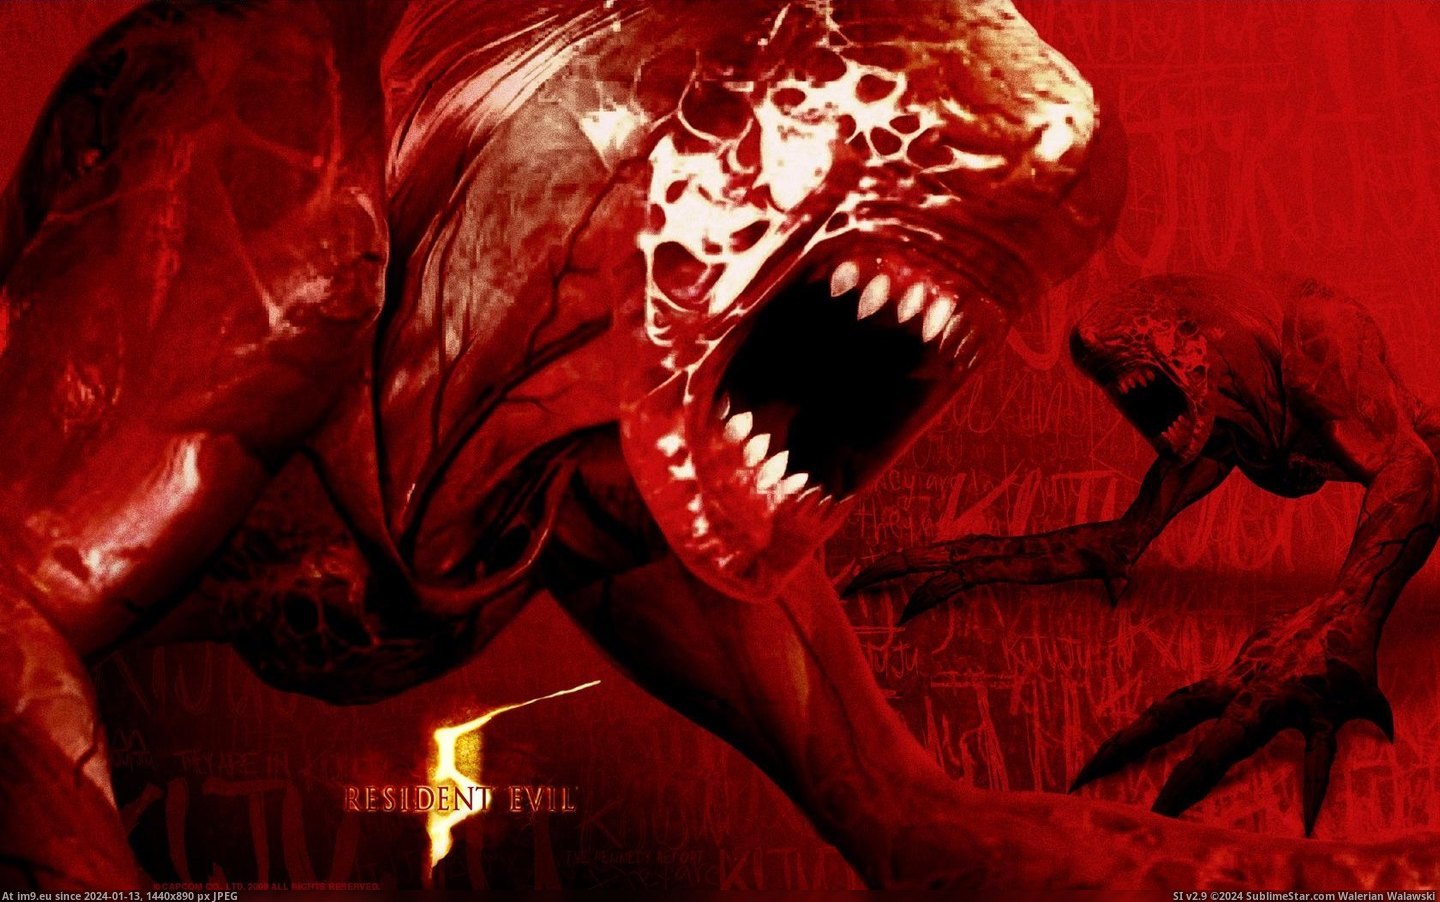 Video Game Resident Evil 61747 (in Games Wallpapers)